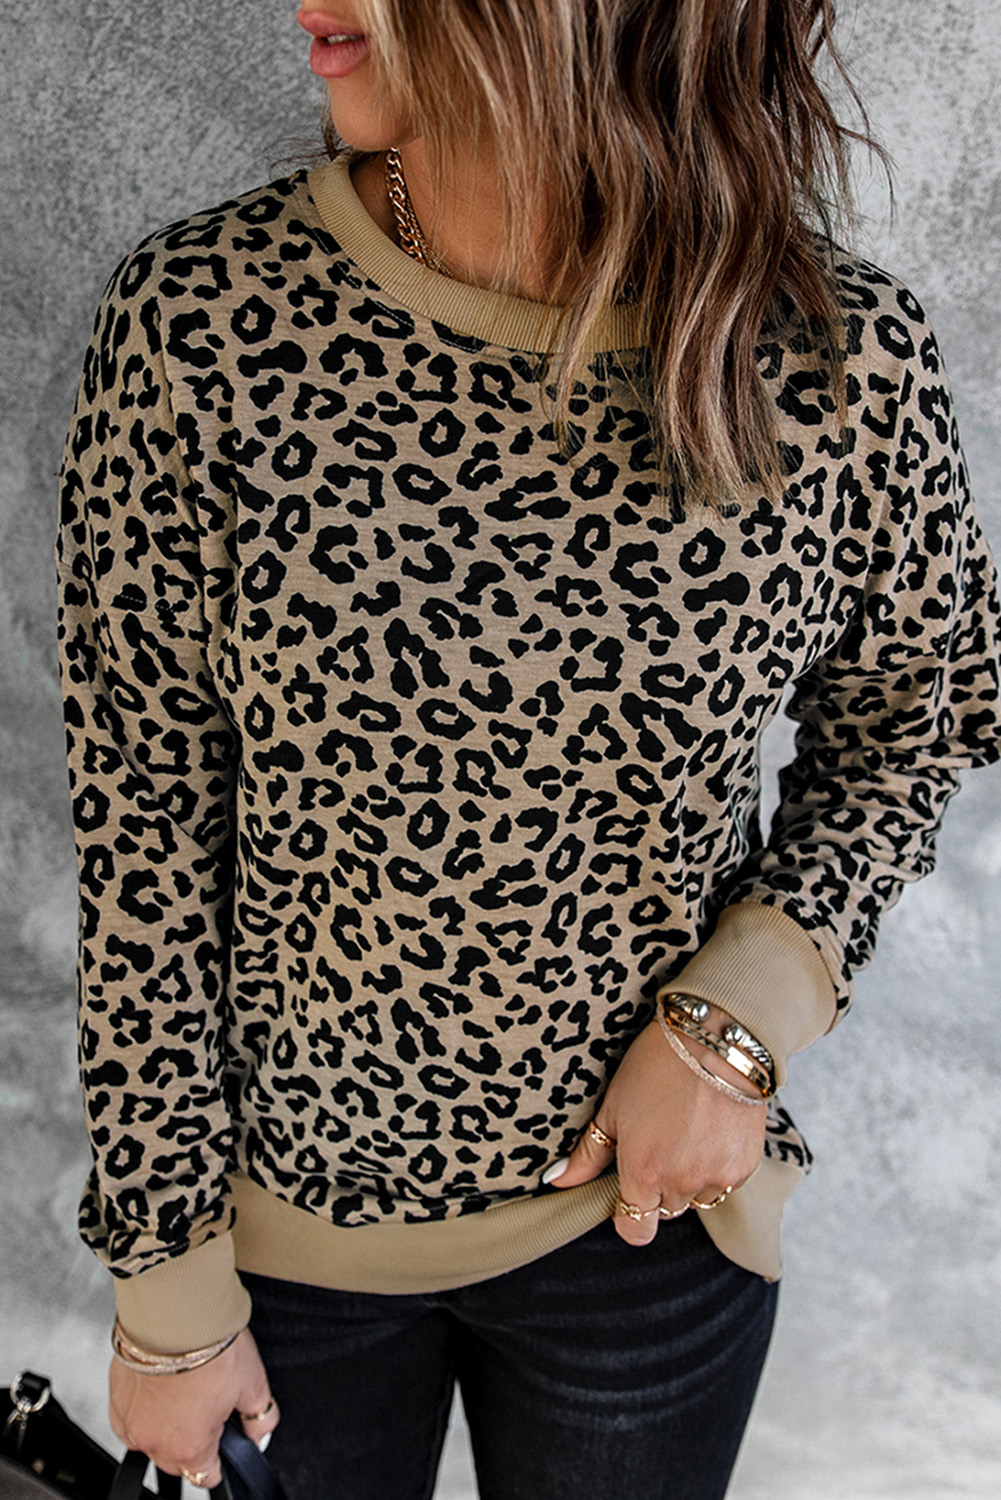 Leopard Pullover Sweatshirt with Slits - (US 4-6)S